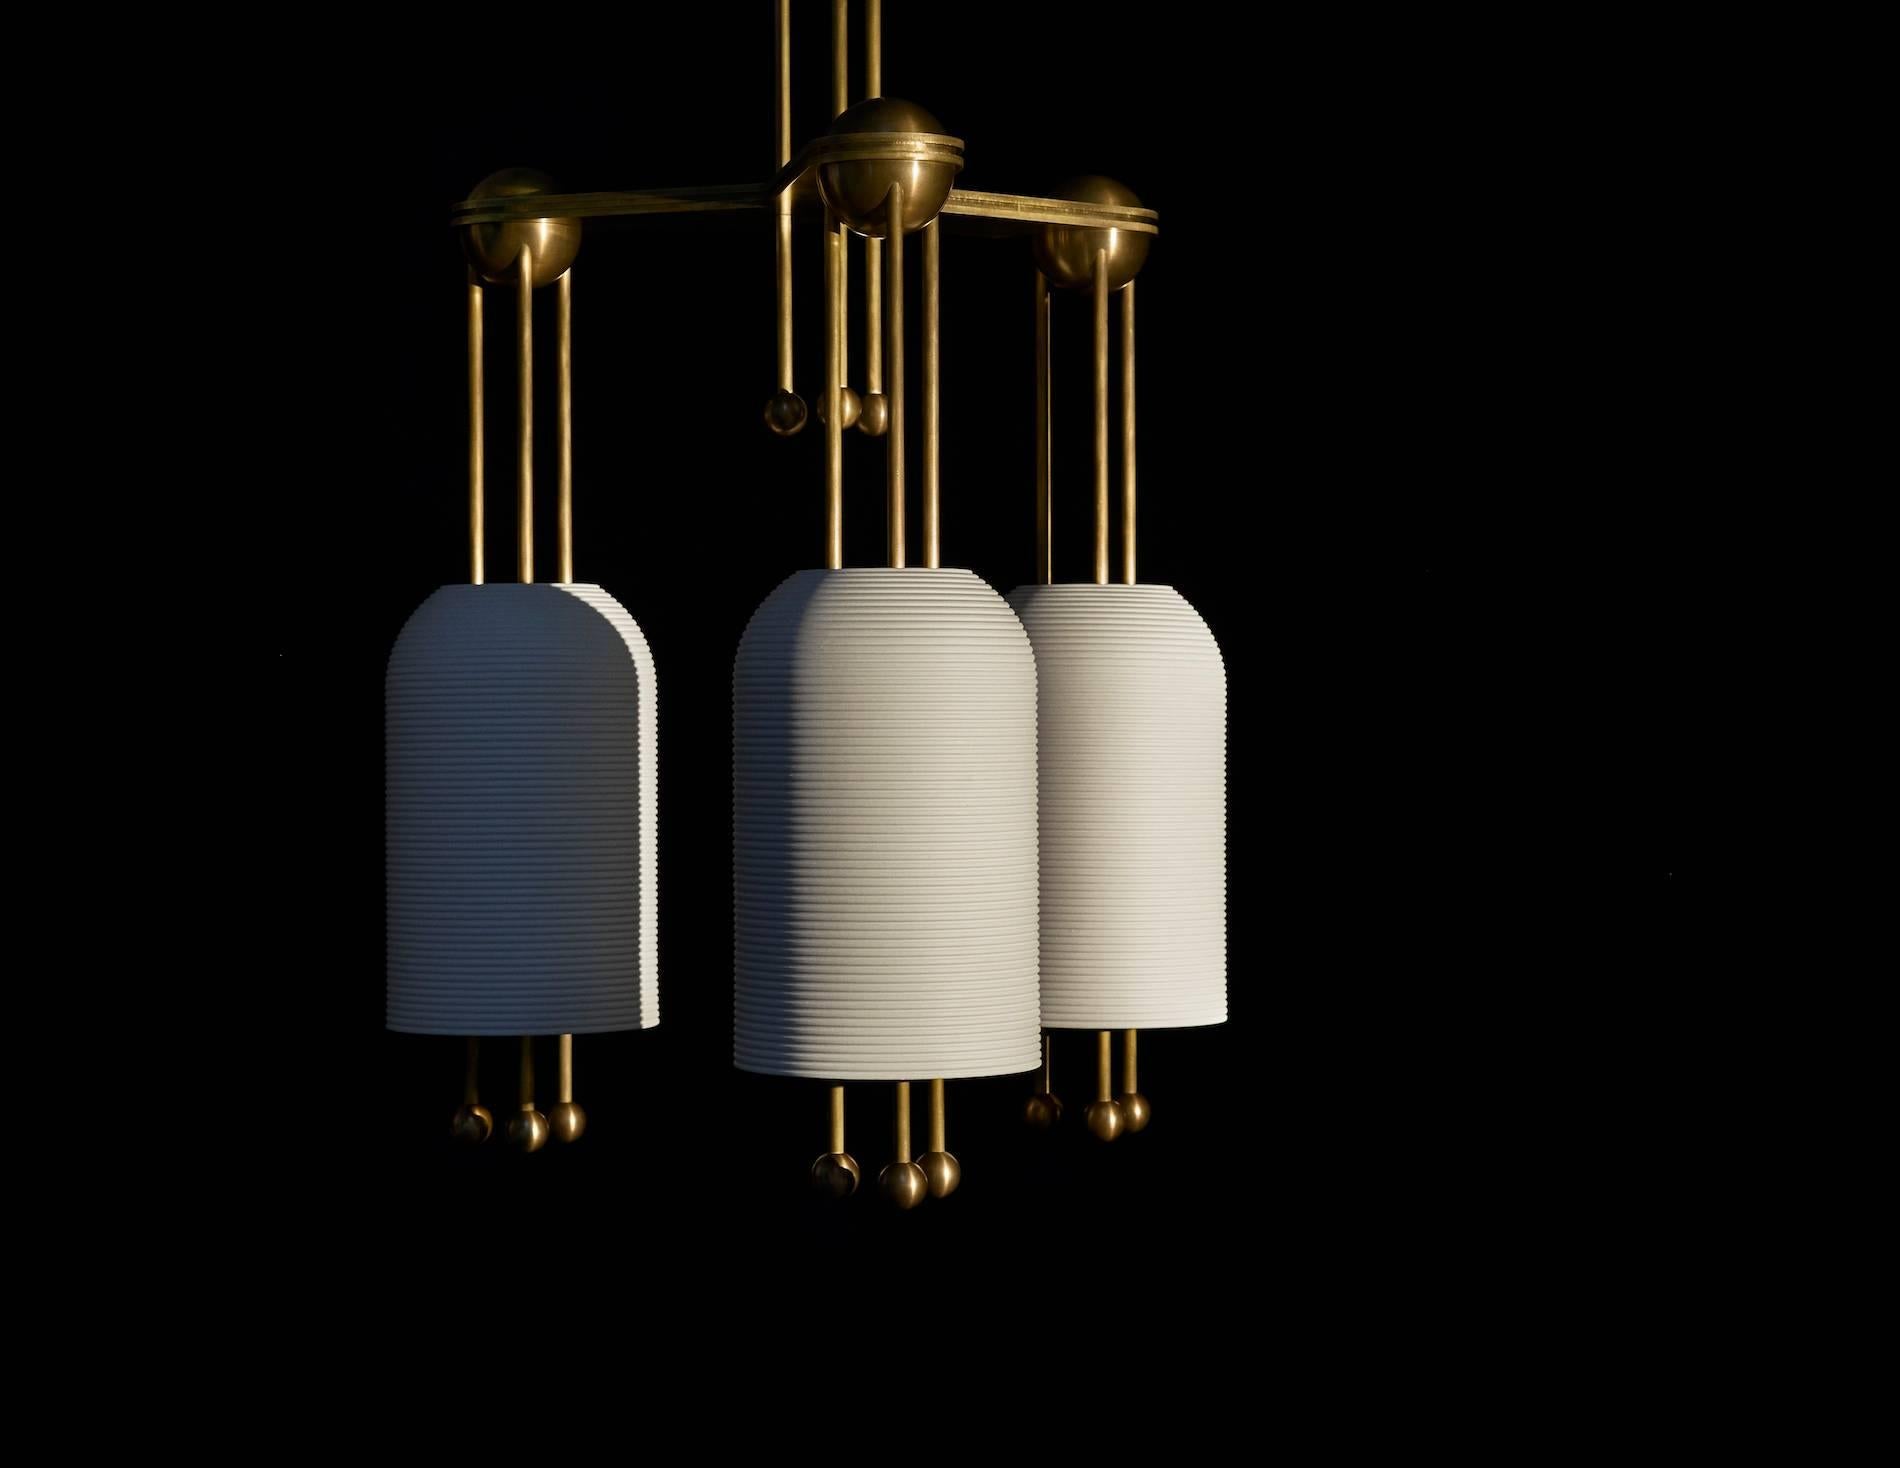 The slip-cast porcelain forms of the Lantern series float along a rigid brass structure. Their glow is punctuated by finely incised fluting, connecting to the most essential element of historical lanterns - light passing through a delicate